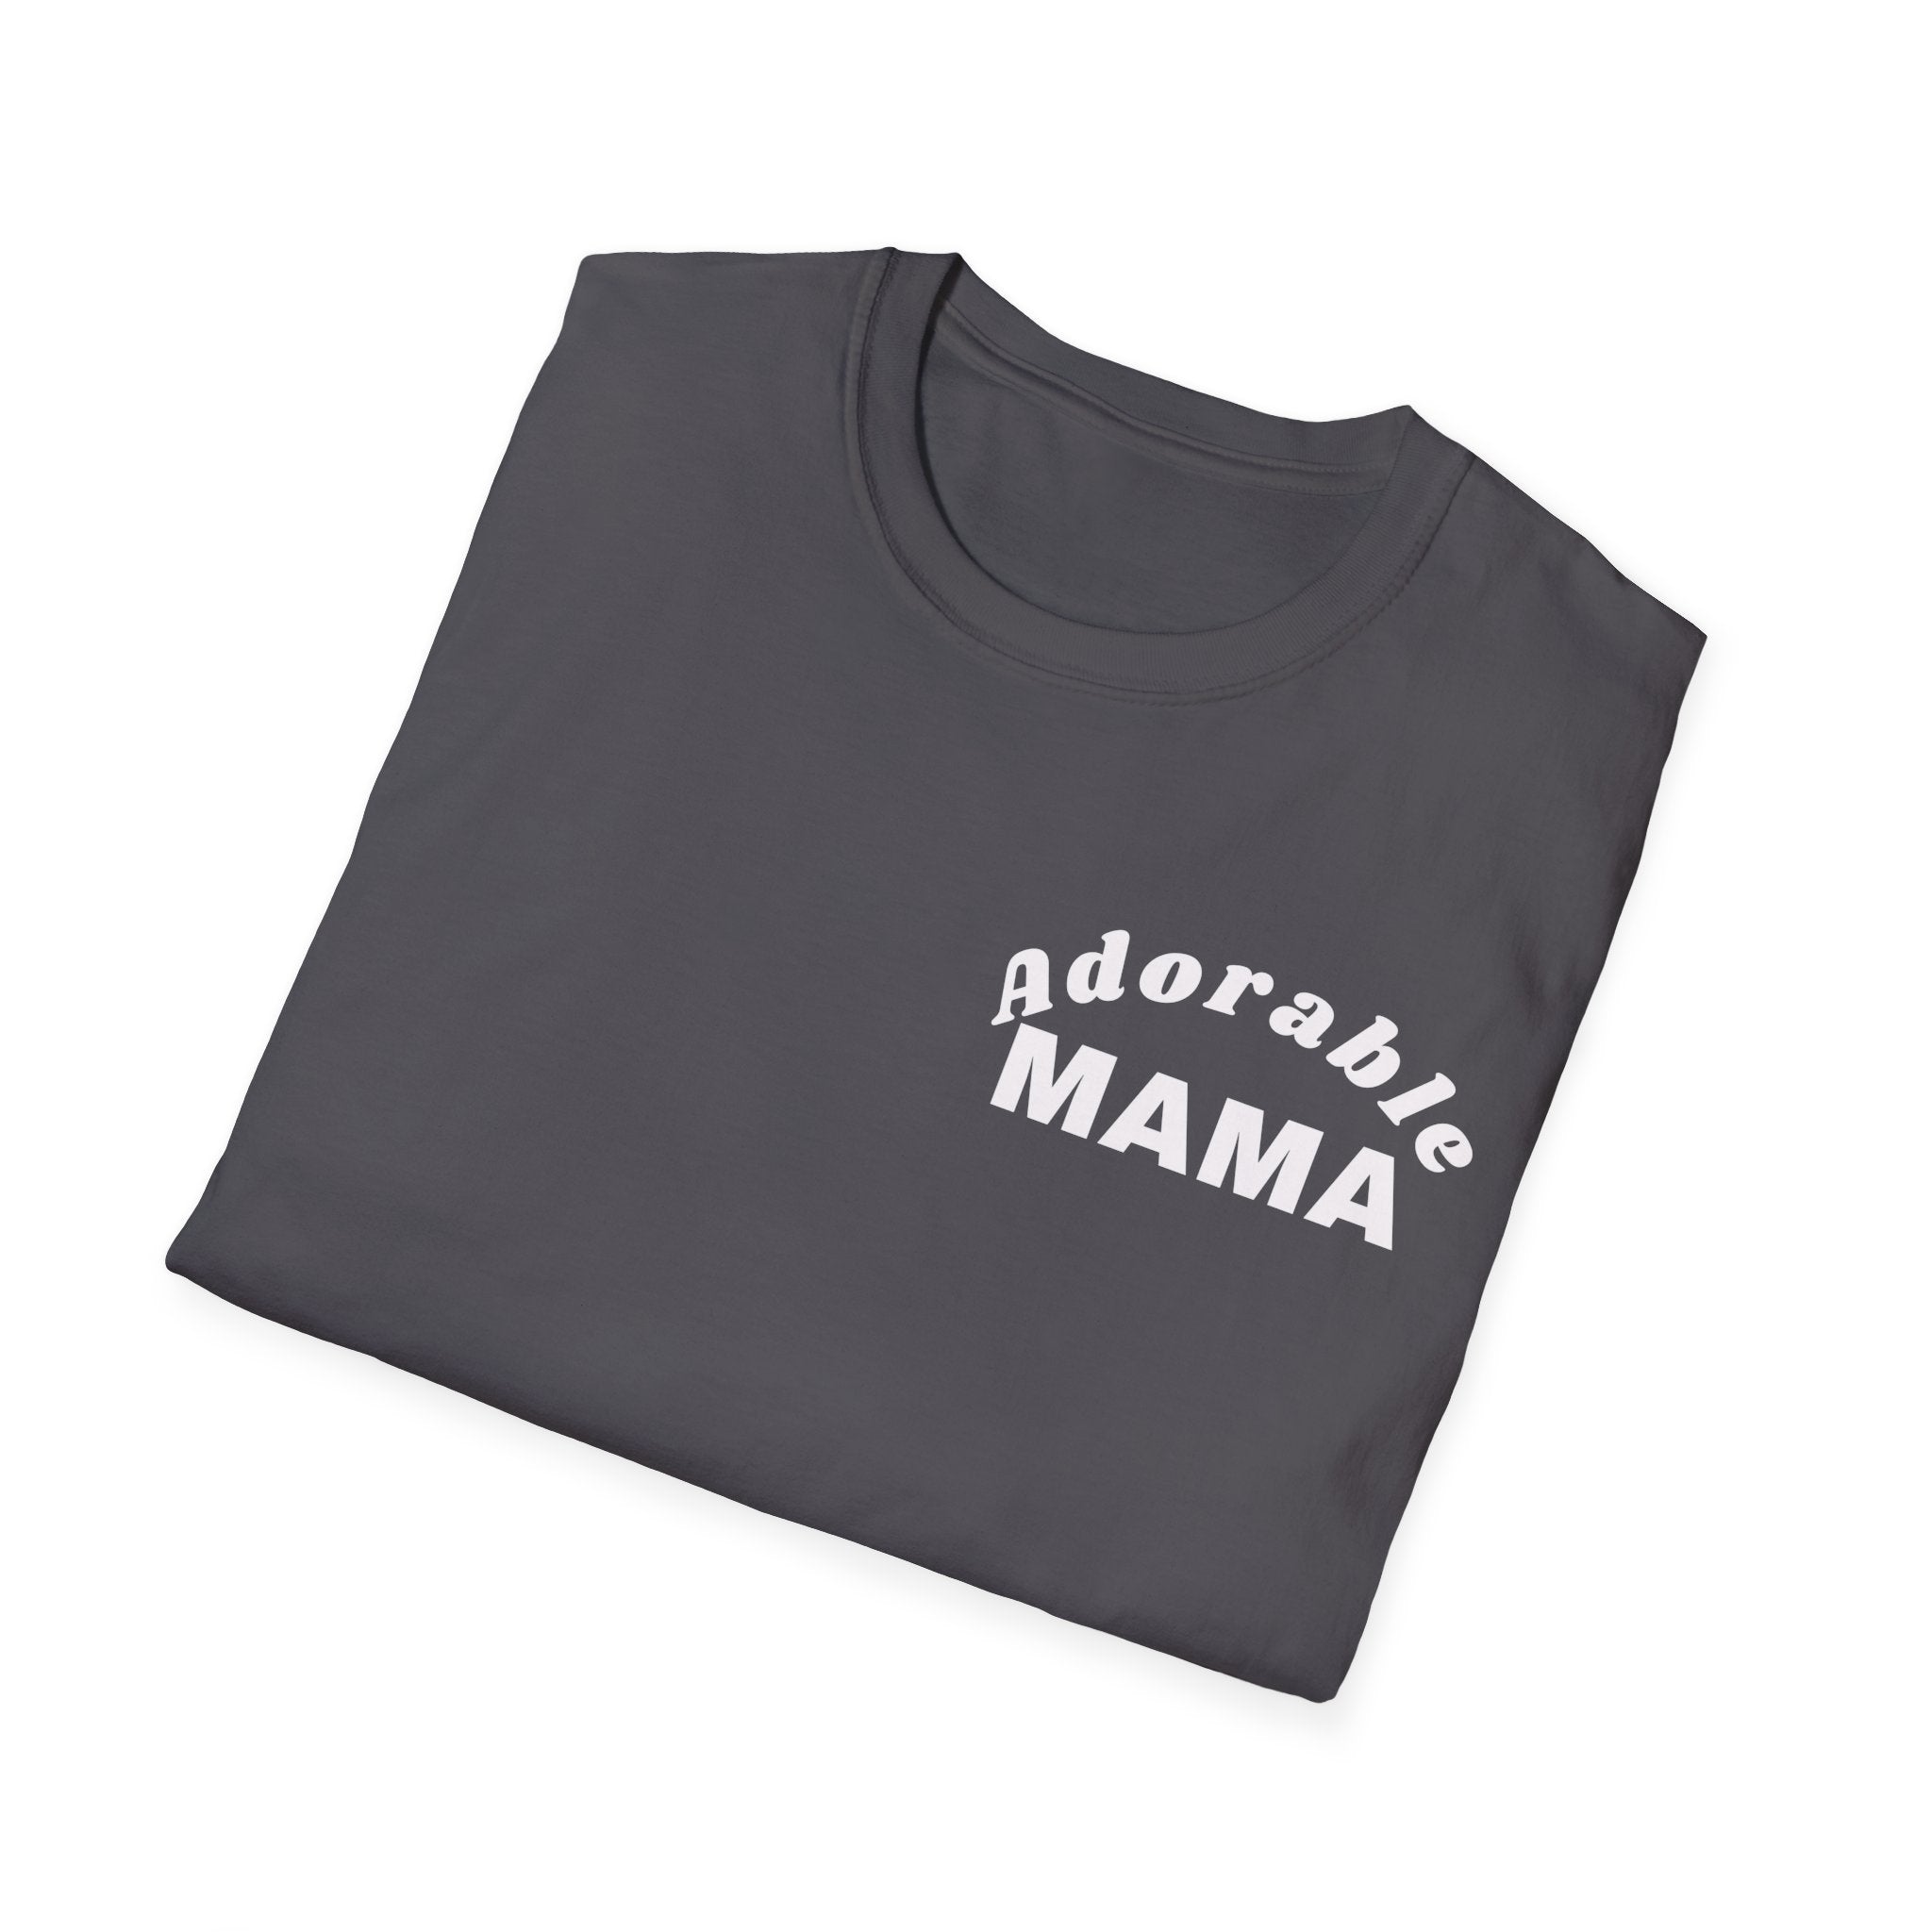 Adorable Mama Unisex Softstyle Crew Neck T-Shirt, Mom Shirt, Gift for Mom, Mother's Day Gift